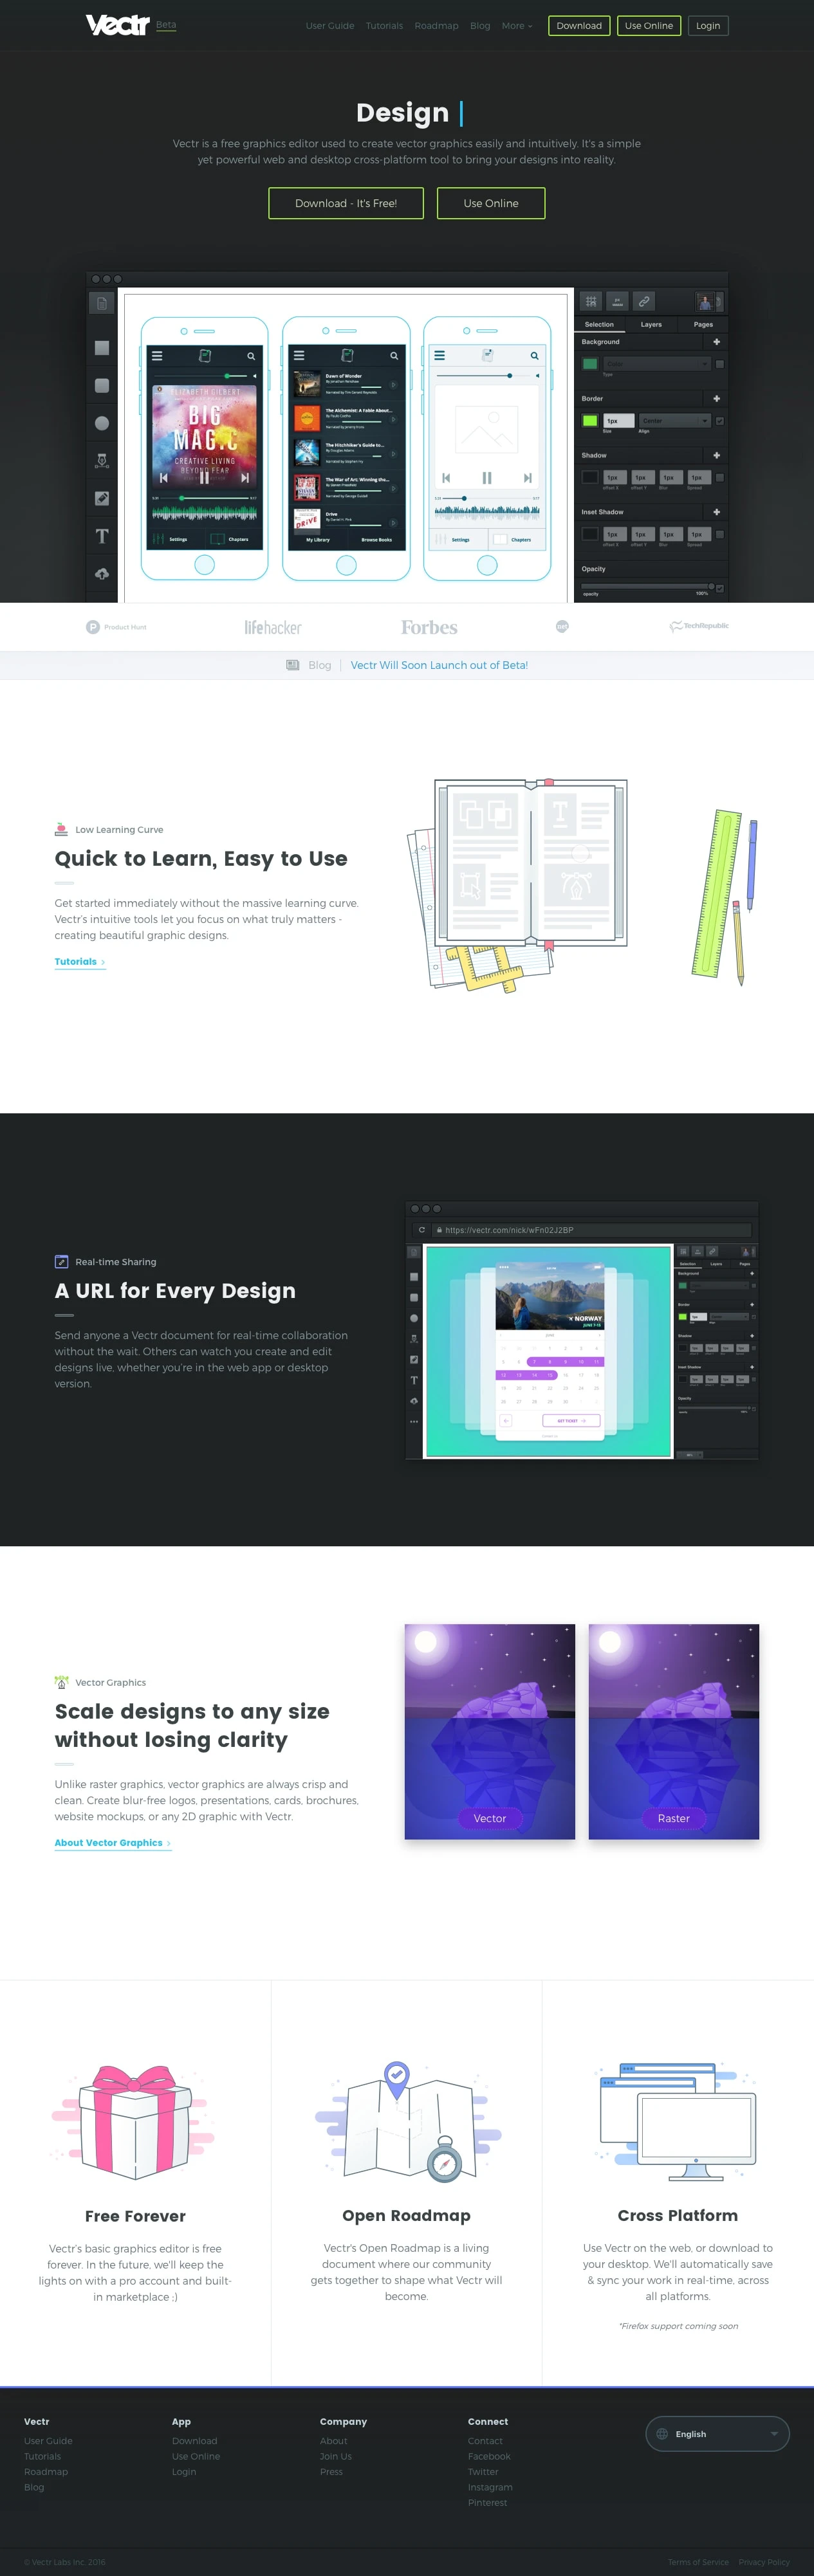 Vectr Landing Page Example: Free vector graphics editor. A simple yet powerful web and desktop cross-platform tool for everyone.